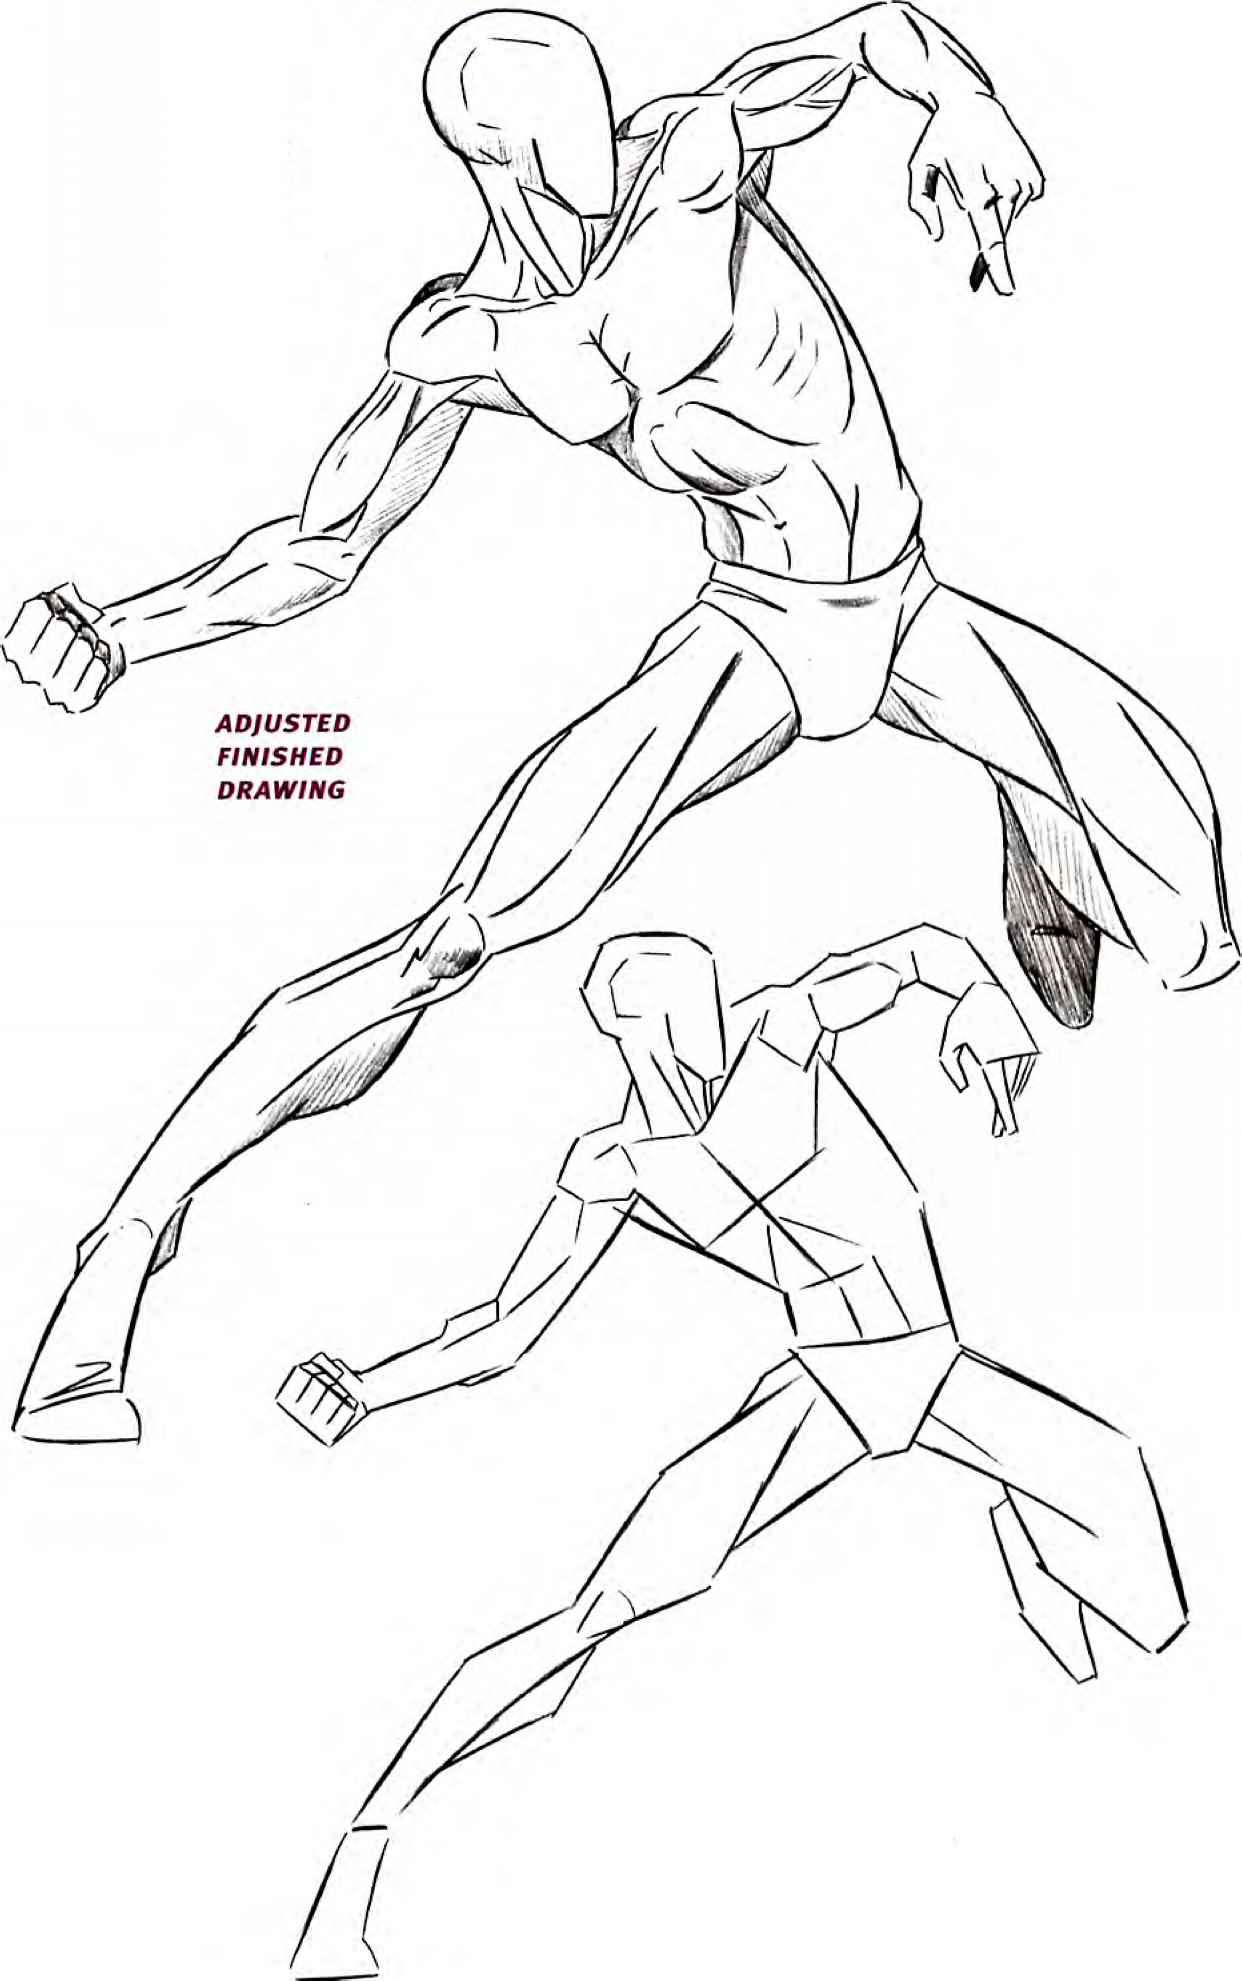 Woman Body Drawing Template : Male Body Drawing Template Bodenswasuee